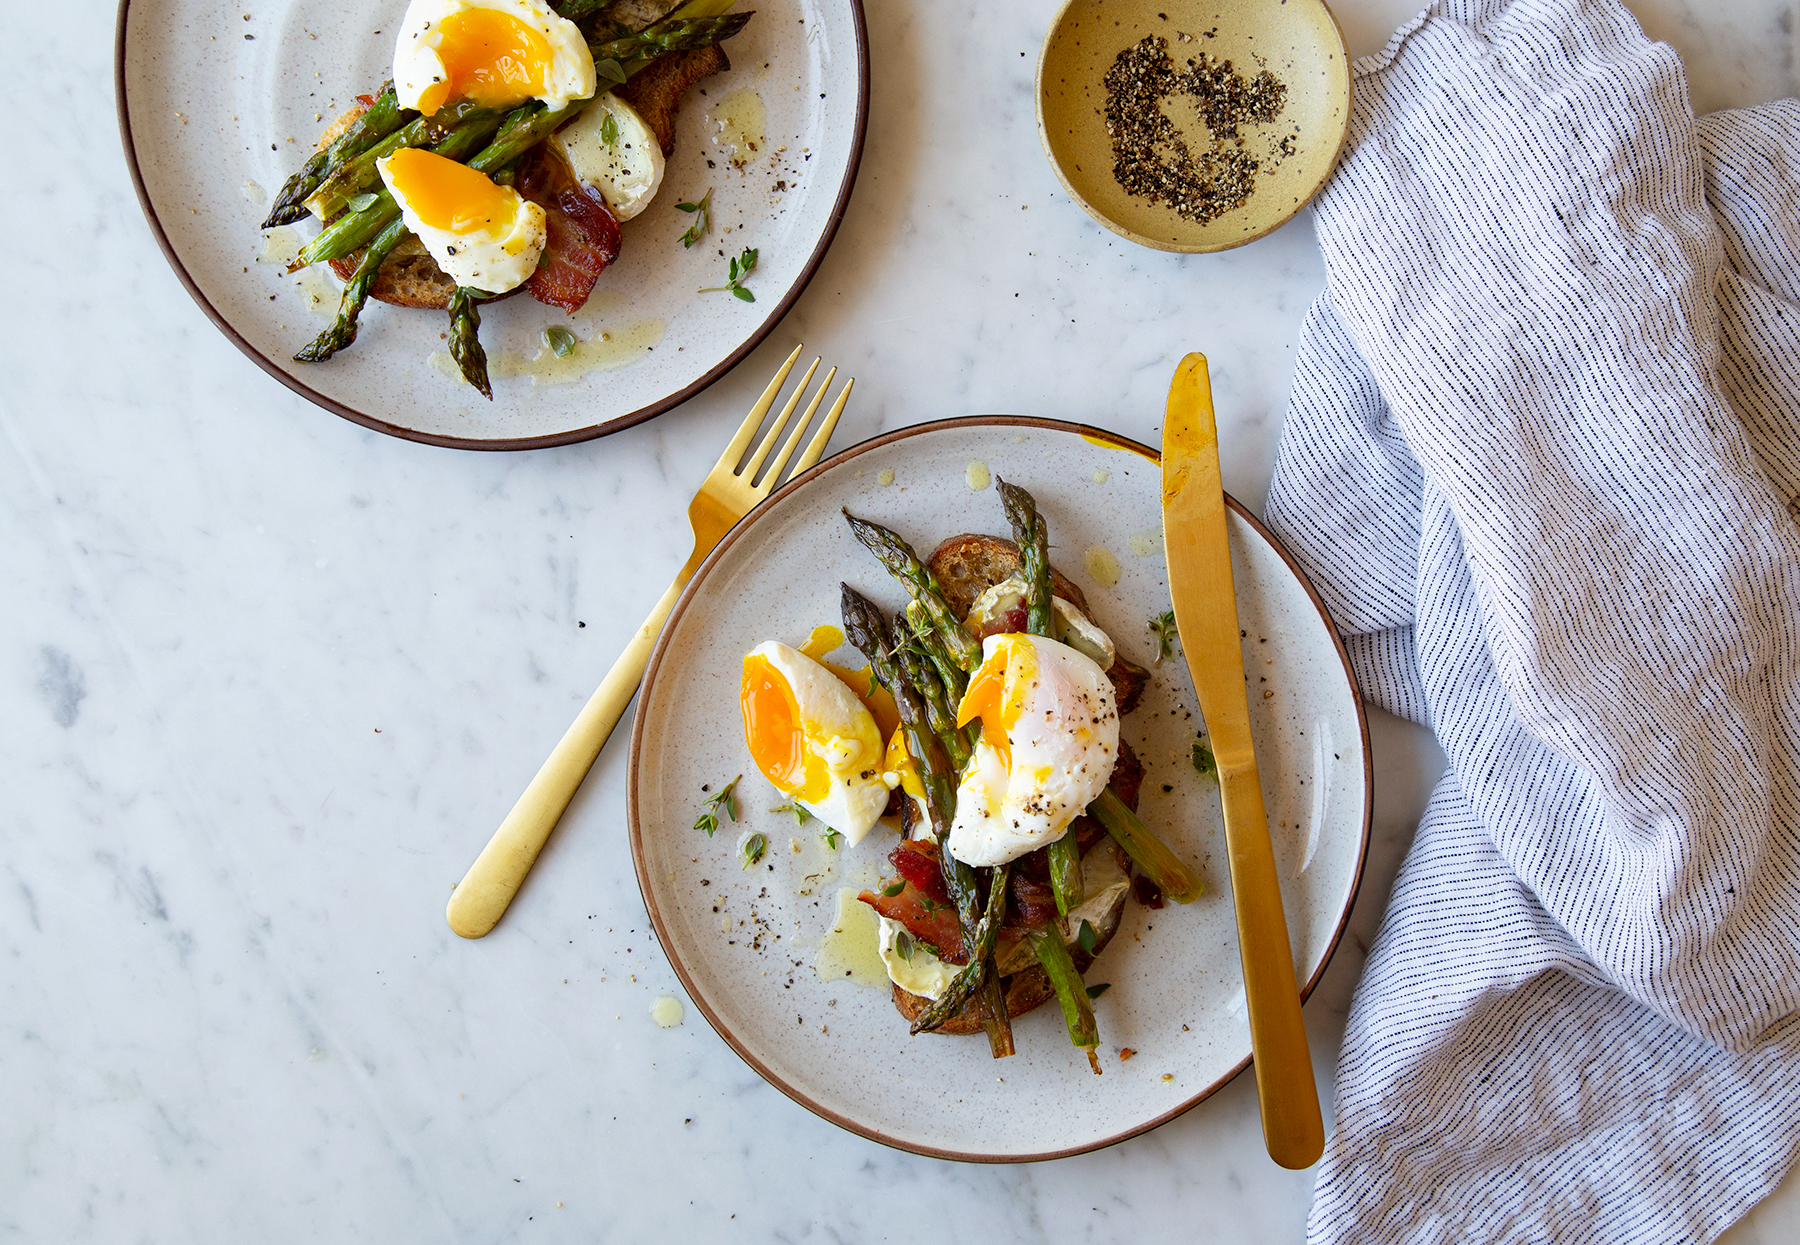 Bacon, Poached Egg, Asparagus and Morcella Toast